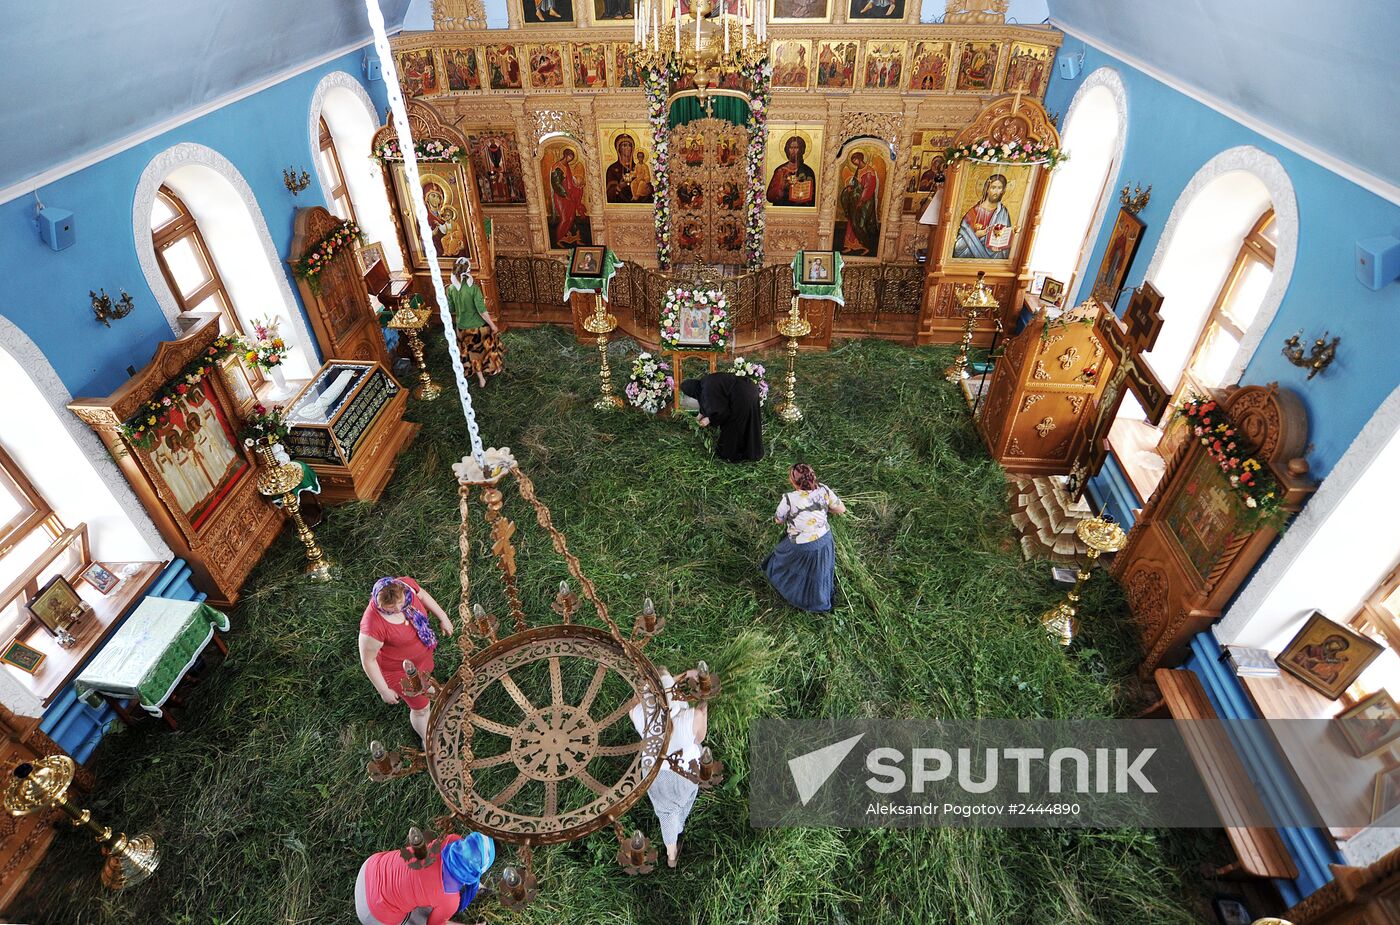 Preparations for Holy Trinity celebrations in Rostov-on-Don